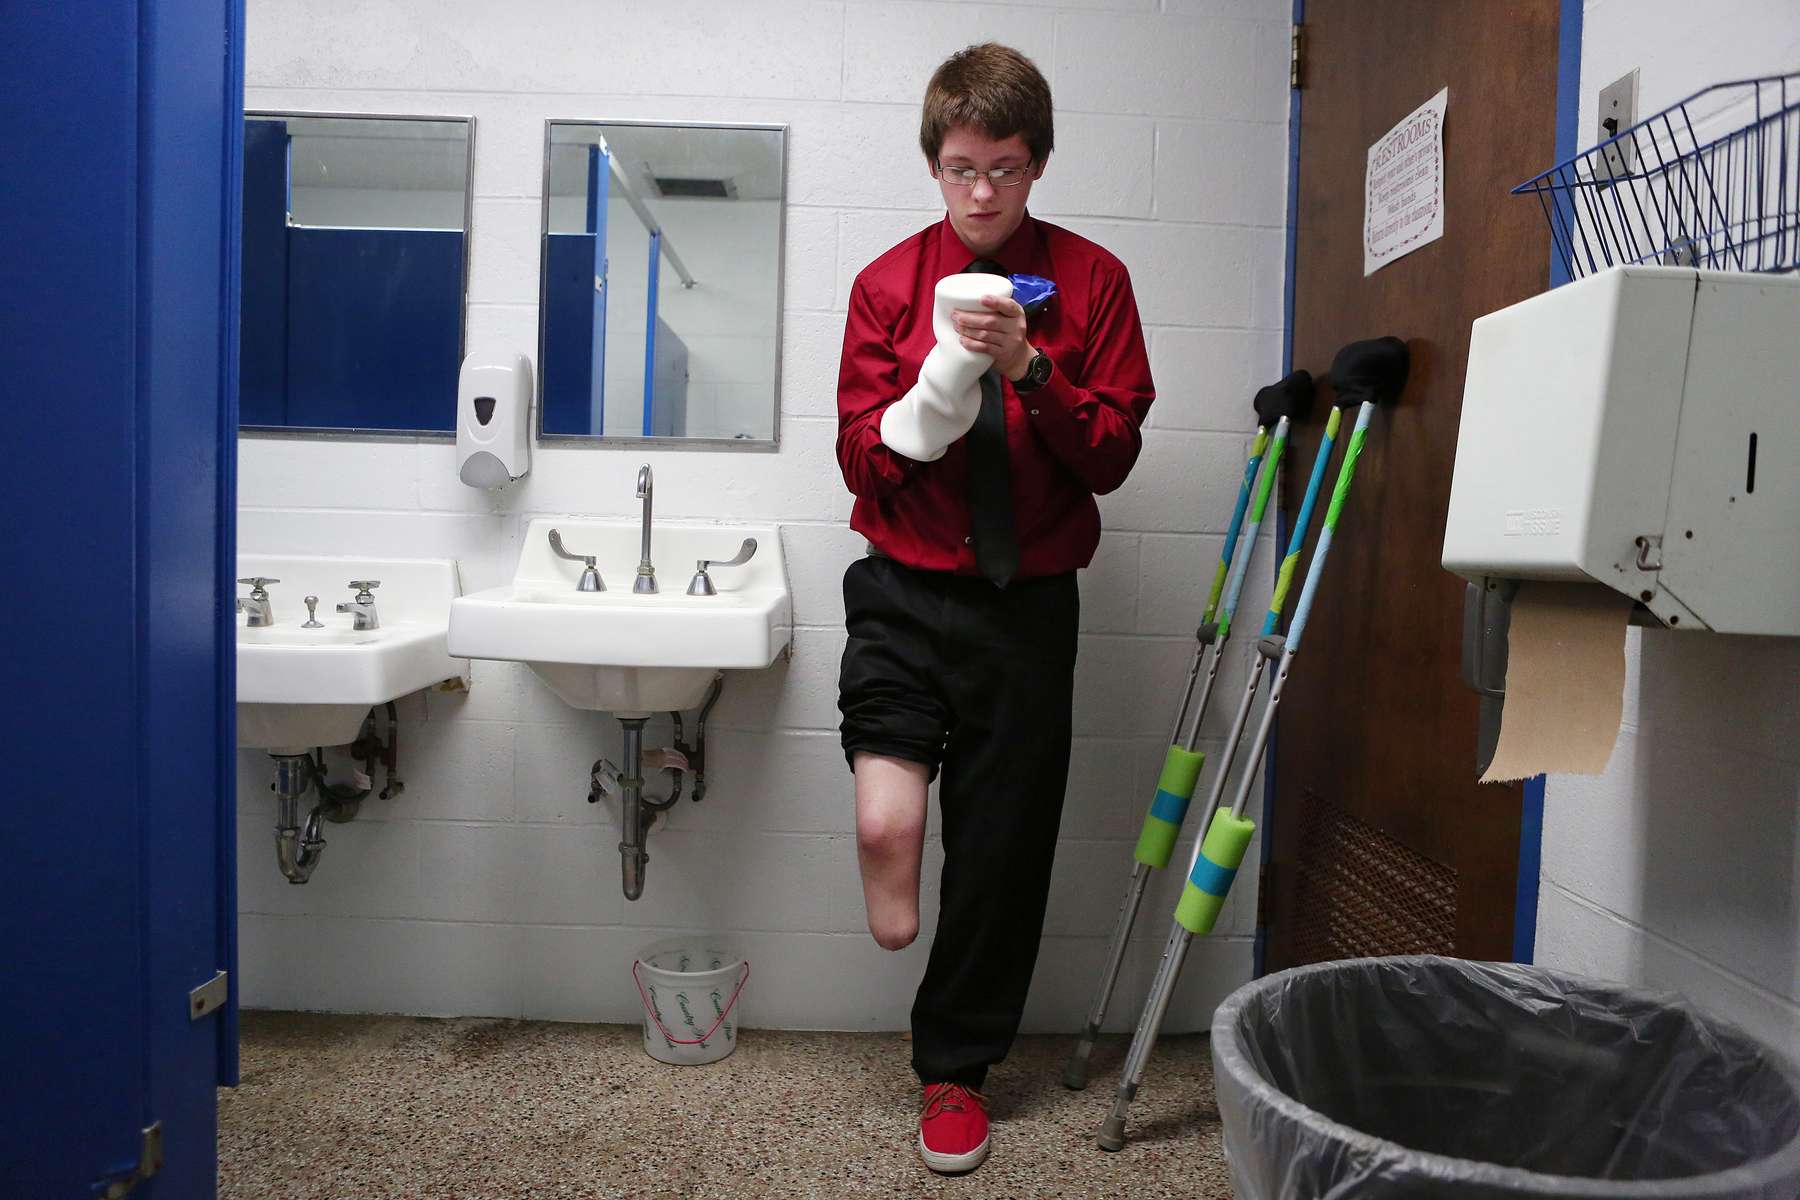 Seth Melvin, 15, who was born with a deformed leg and foot which he decided to have amputated, adjusted his prosthetic liner before his eighth grade graduation at Cornell Grade School in Cornell, Ill. Melvin accomplished one of his goals, to walk with a prosthetic to accept his diploma at graduation.